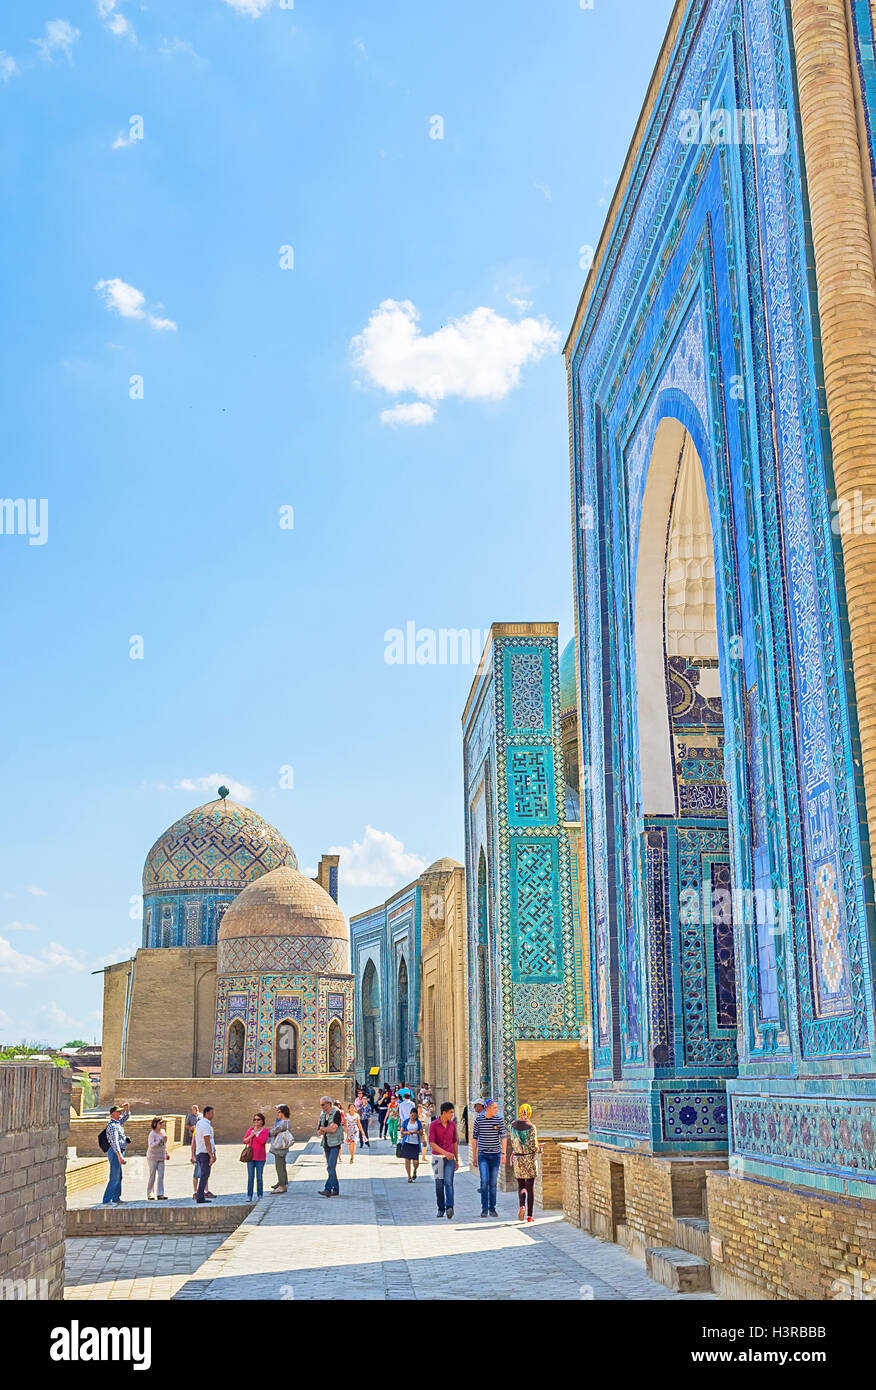 The Shah-i-Zinda architectural complex is the place of historic and cultural interest in Samarkand. Stock Photo